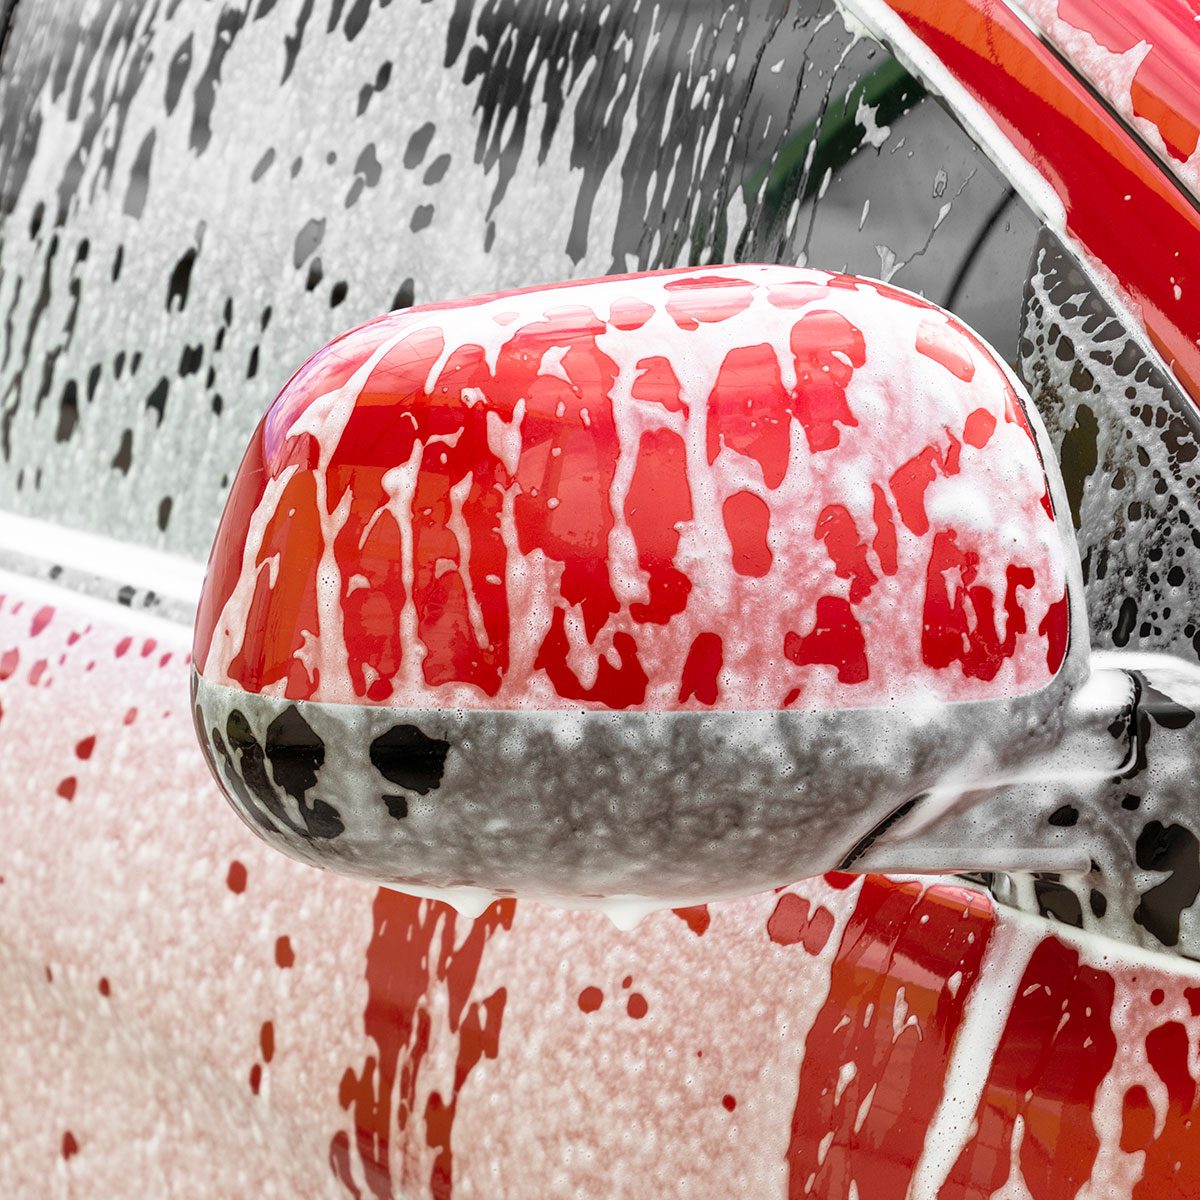 Advantages of Touchless Car Wash Technology - Surf N' Shine